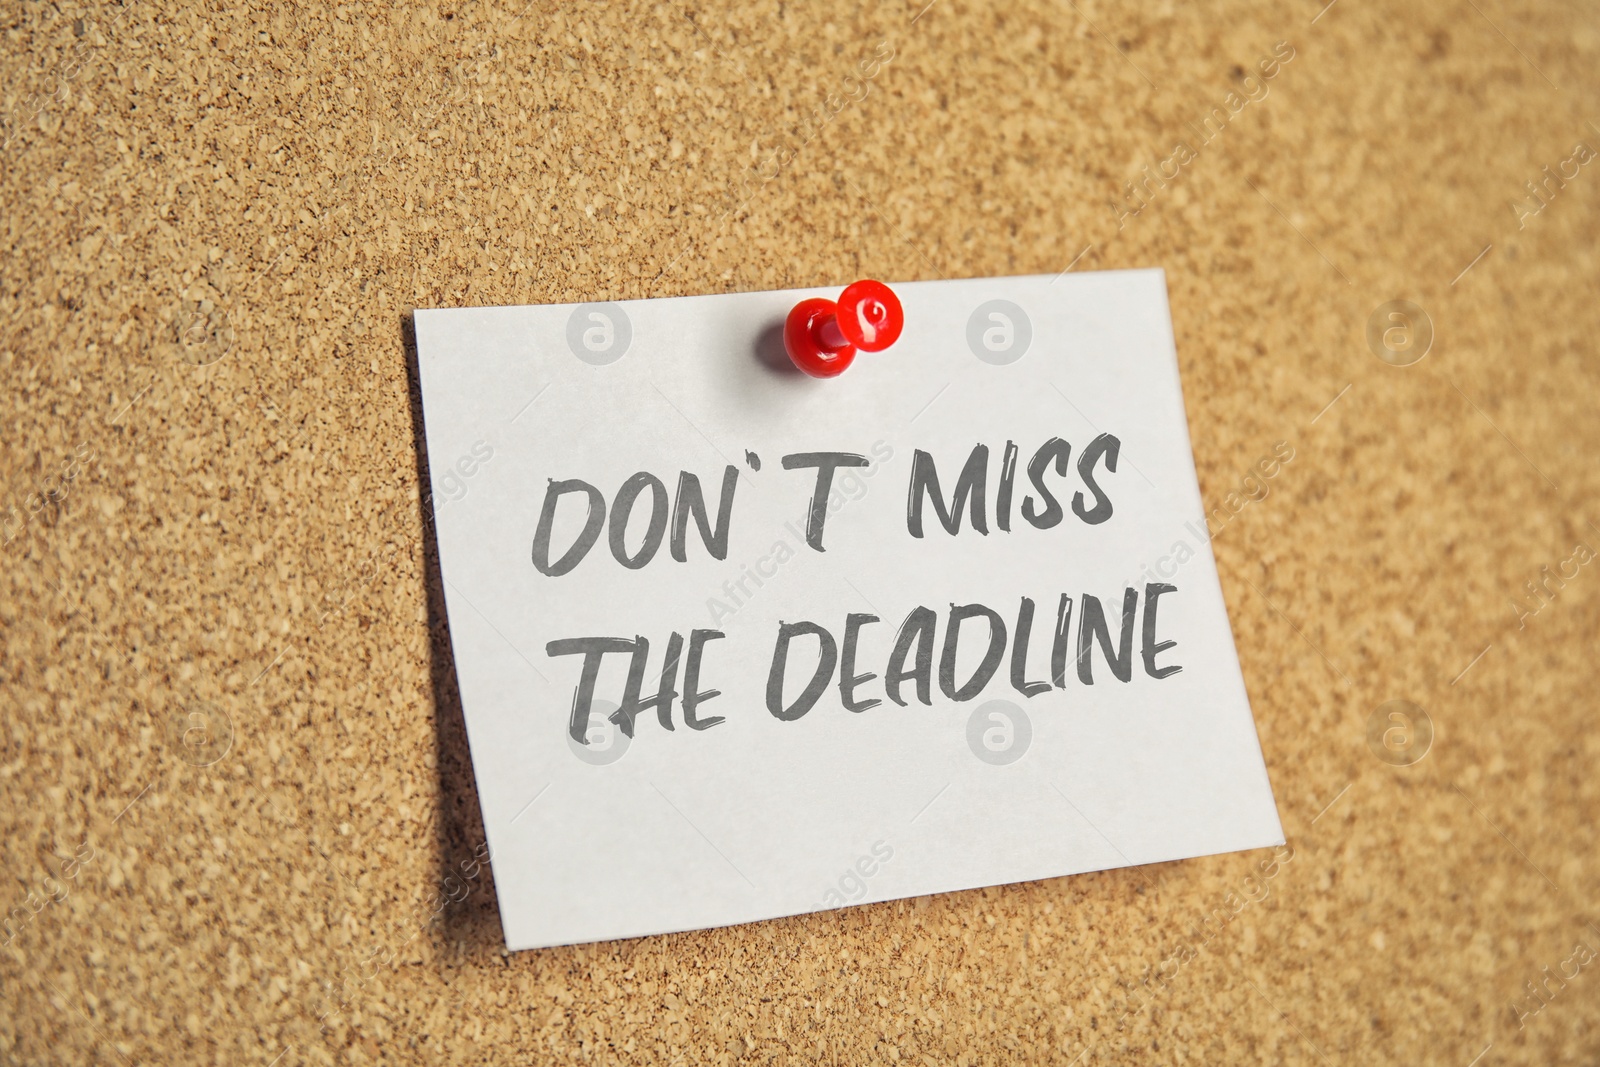 Image of Note with reminder Don't Miss The Deadline attached to cork board